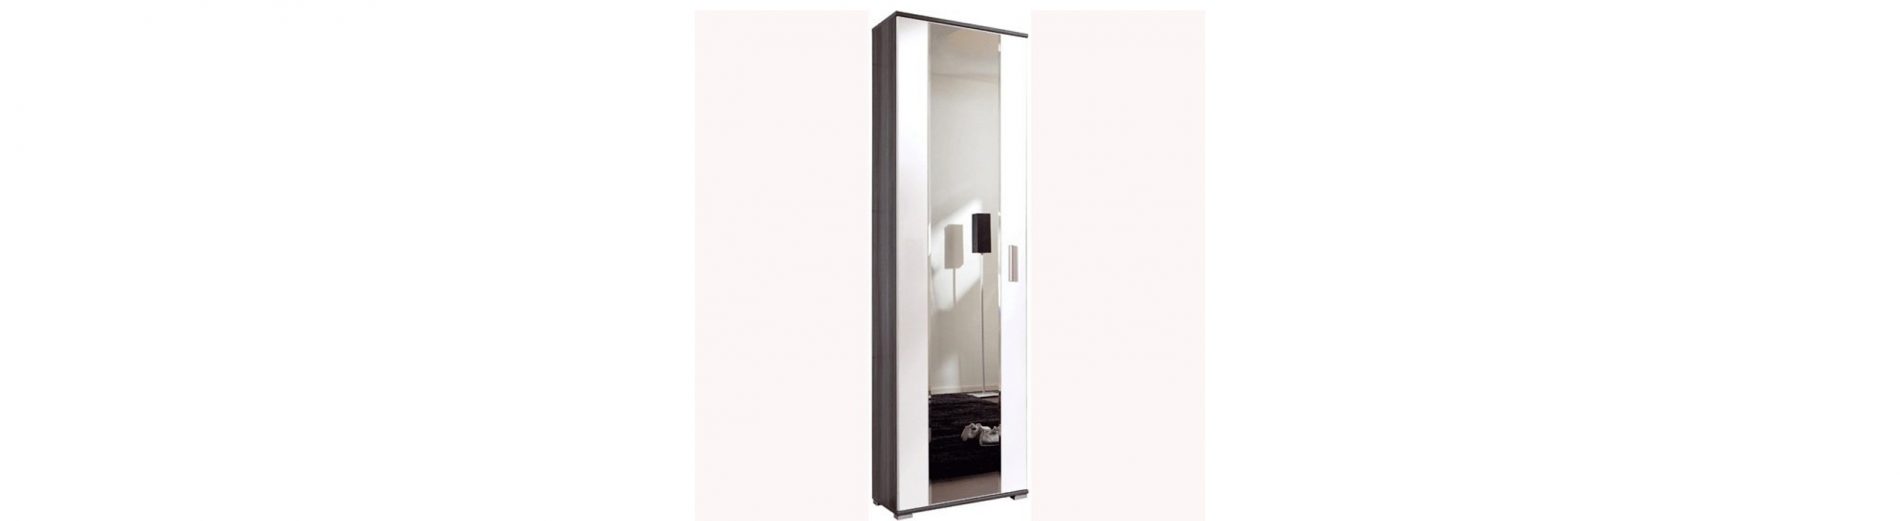 Cheap Wardrobes For Sale Under £200